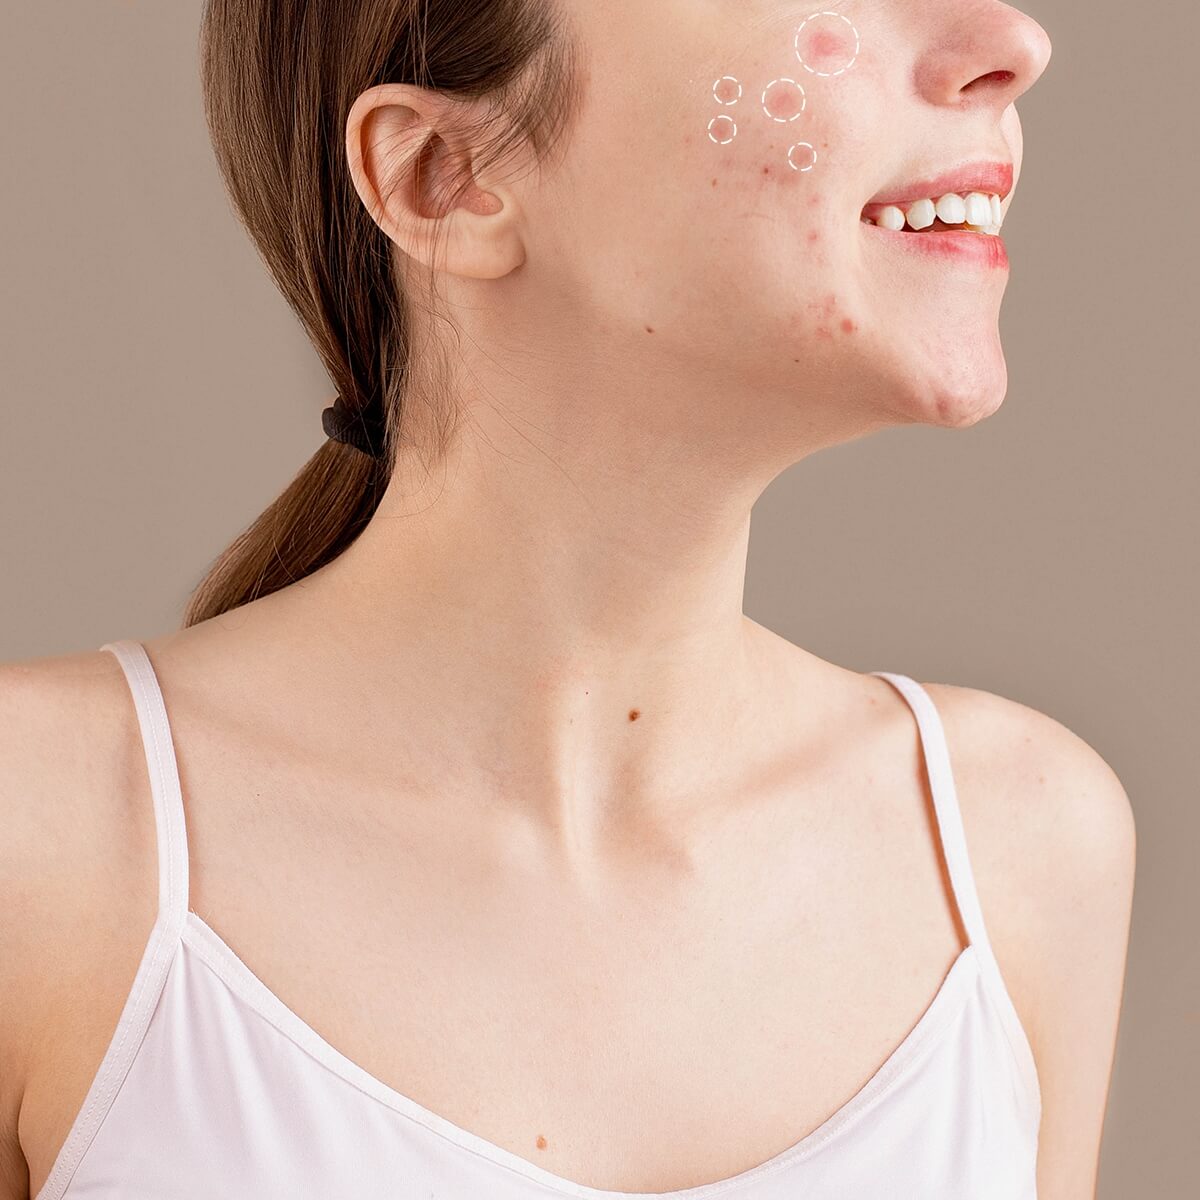 Acne: What’s The Missing Link?